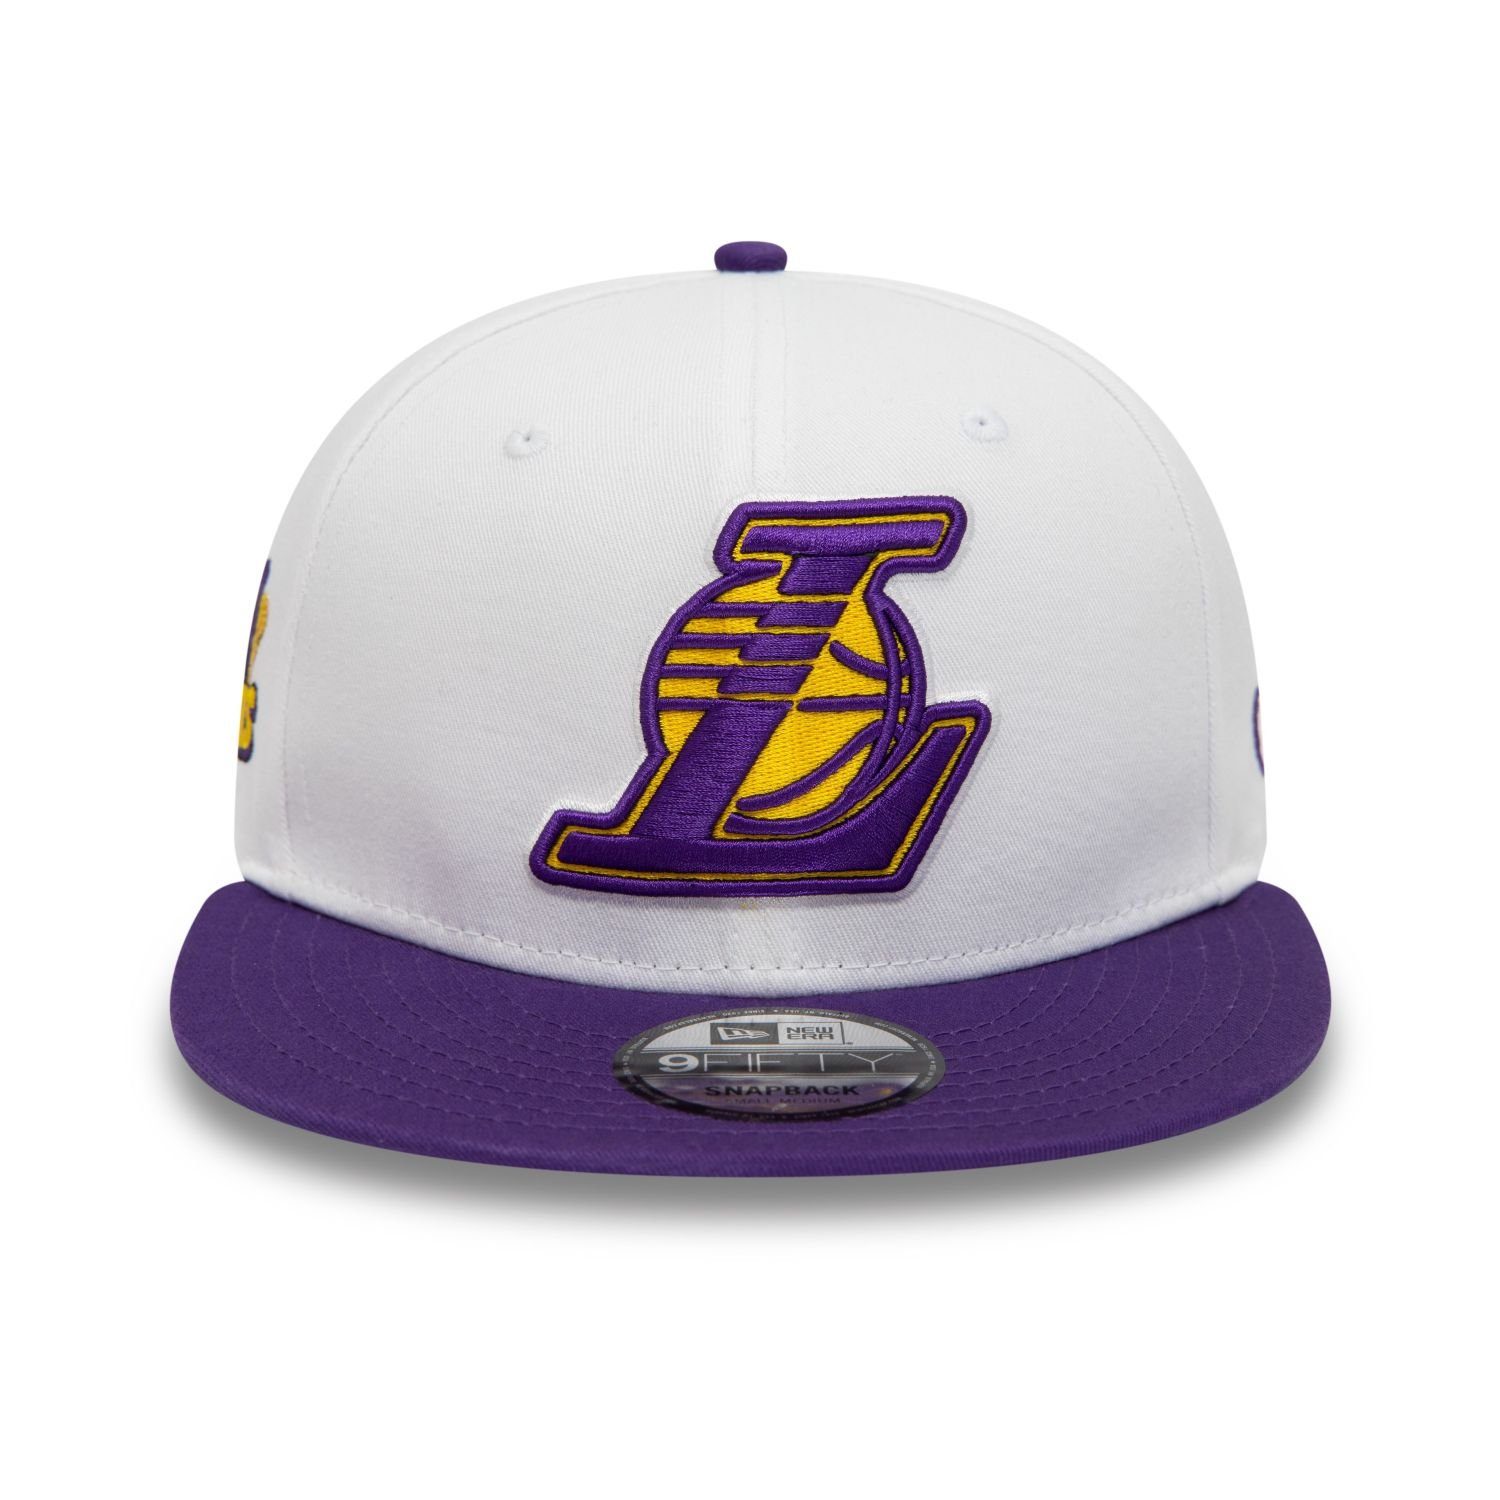 New Era Snapback SIDE Los Lakers Cap 9Fifty PATCH Angeles